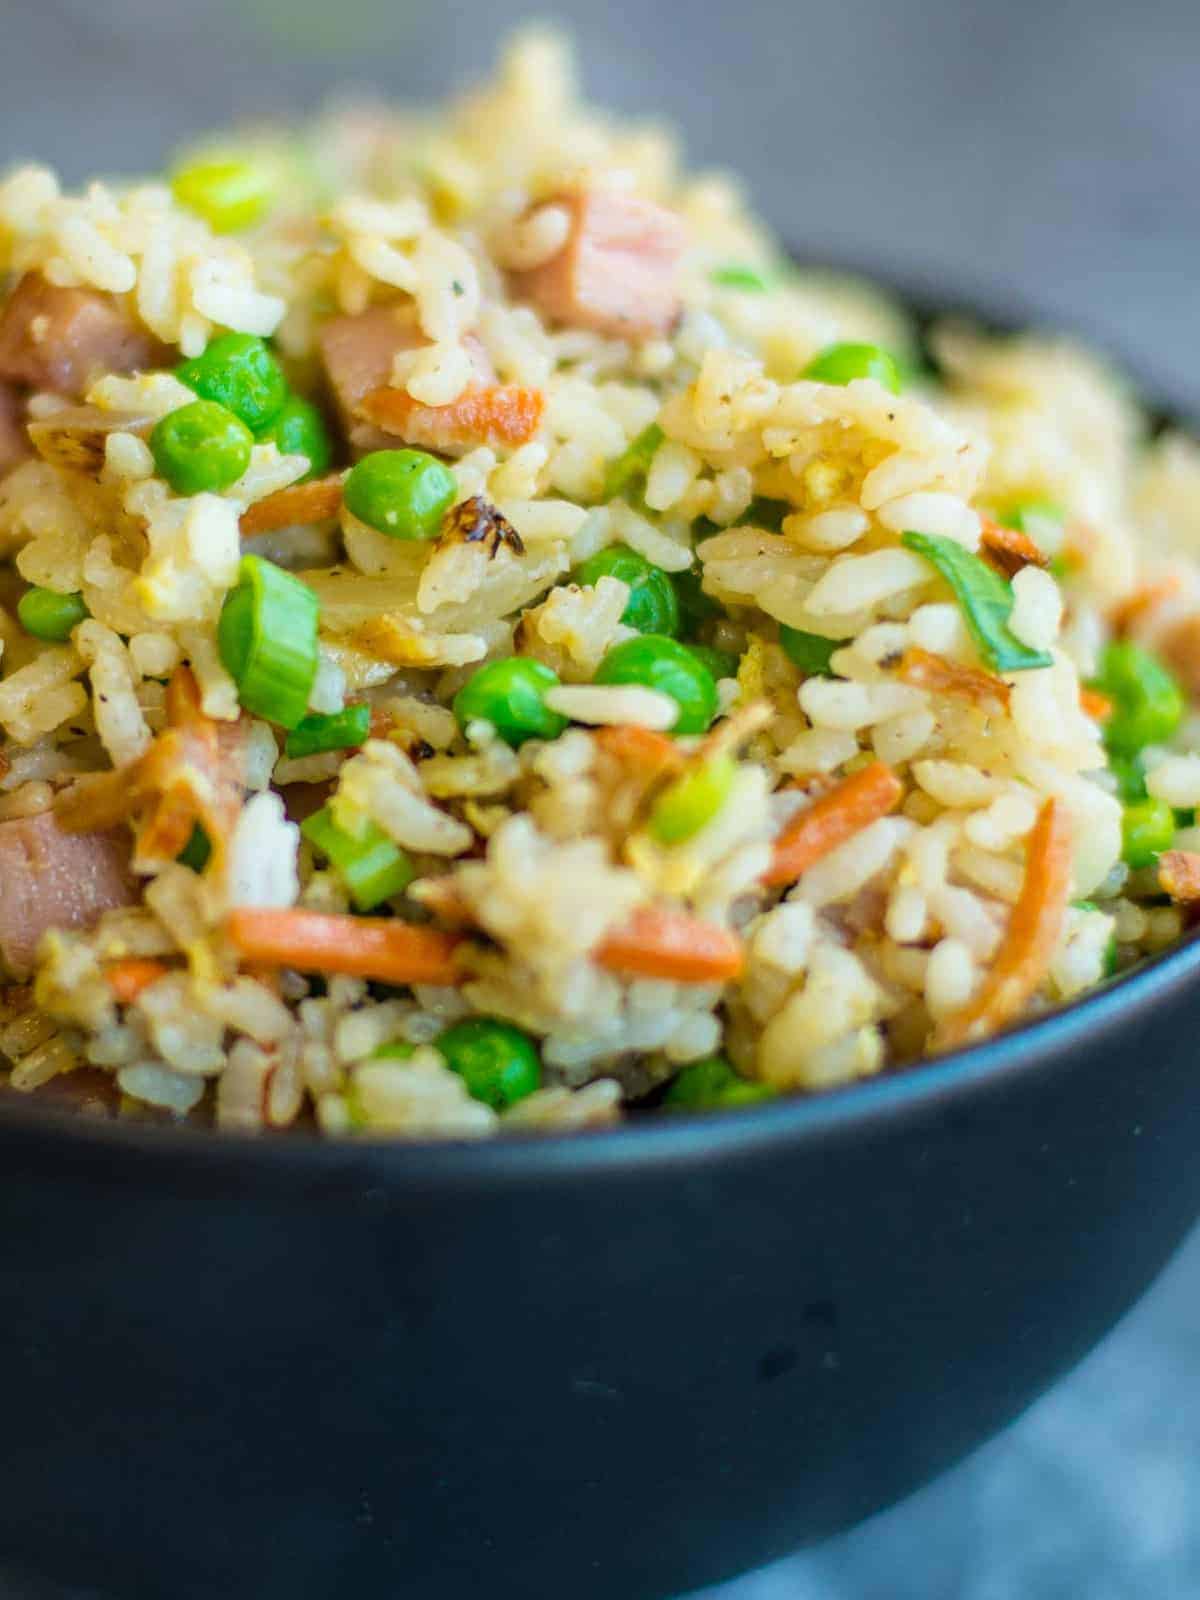 spam fried rice close up